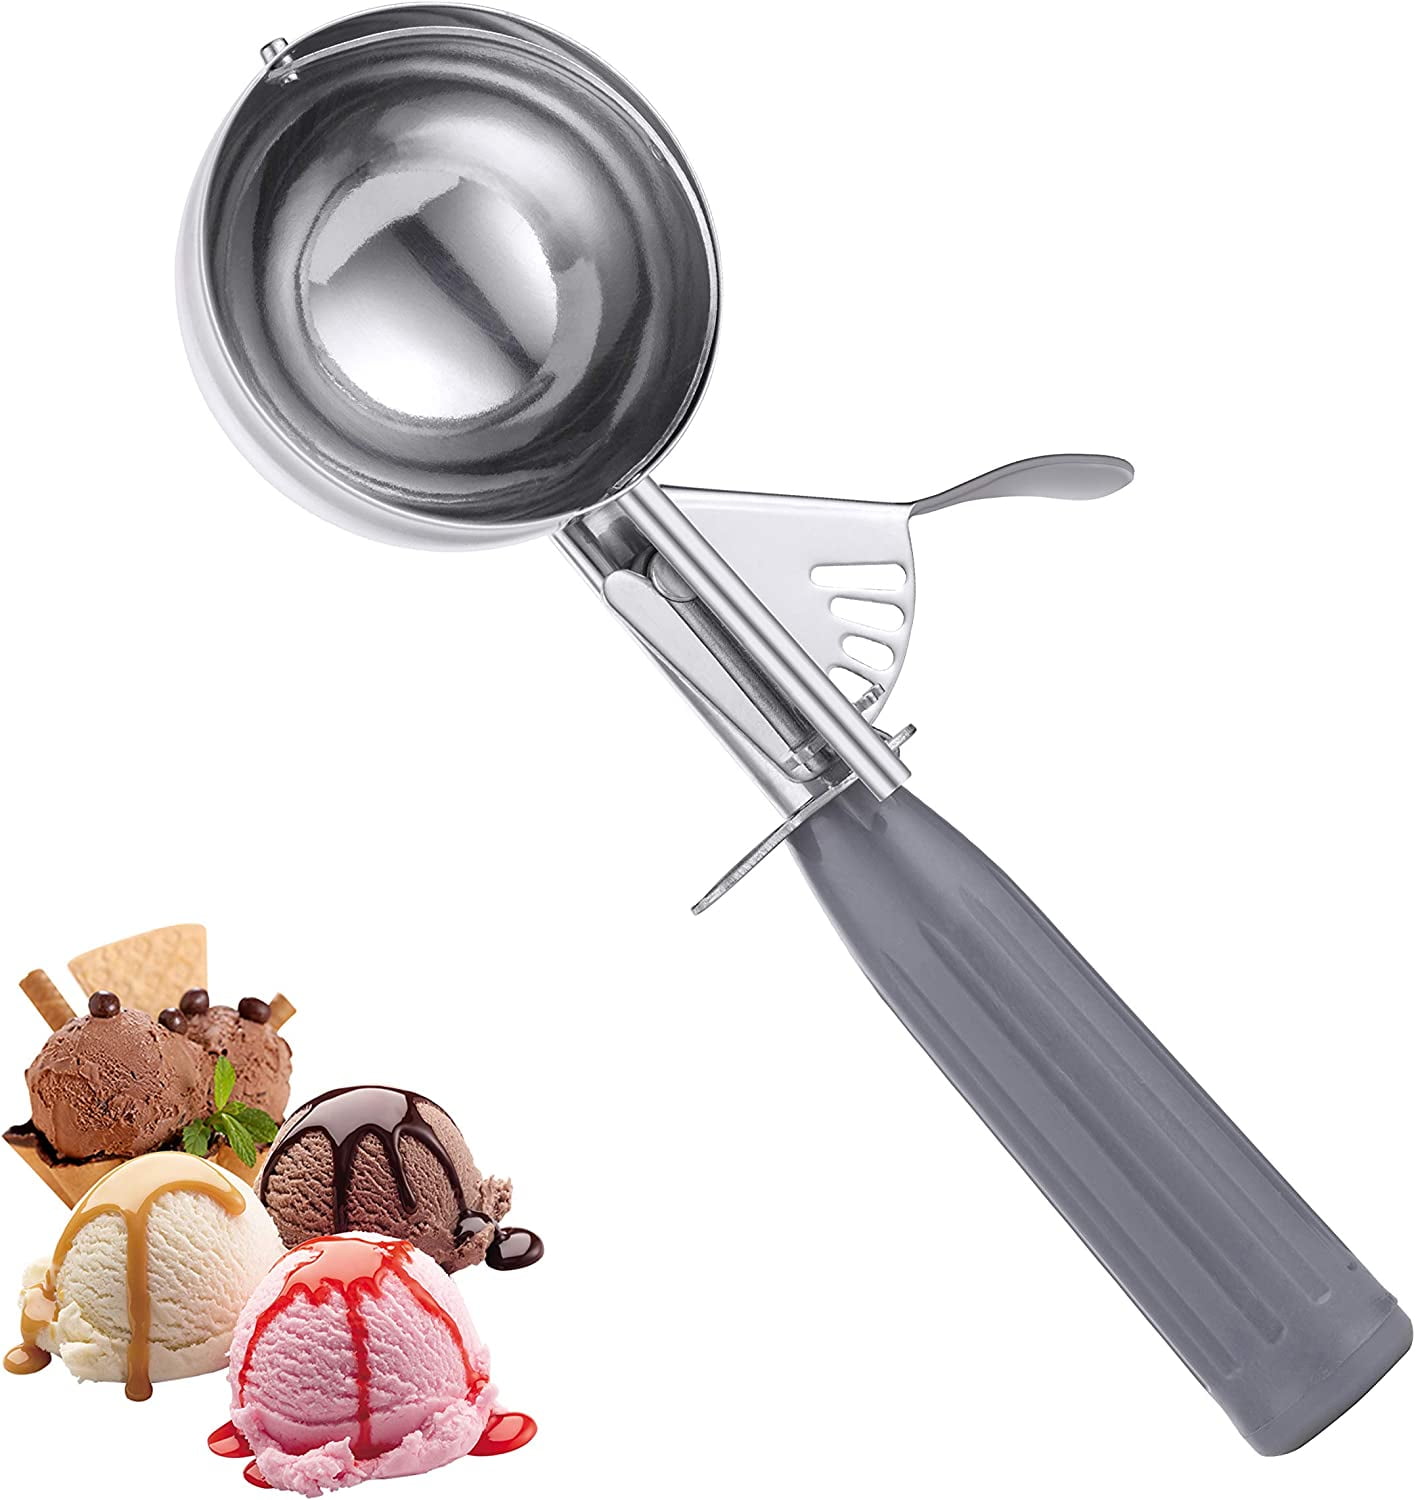  Cookie Scoop 4 Tbsp, TJ POP Professional Stainless Steel Ice  Cream Scoop 60 mm, Soft Grips, Quick Trigger Release, 60 ml: Home & Kitchen